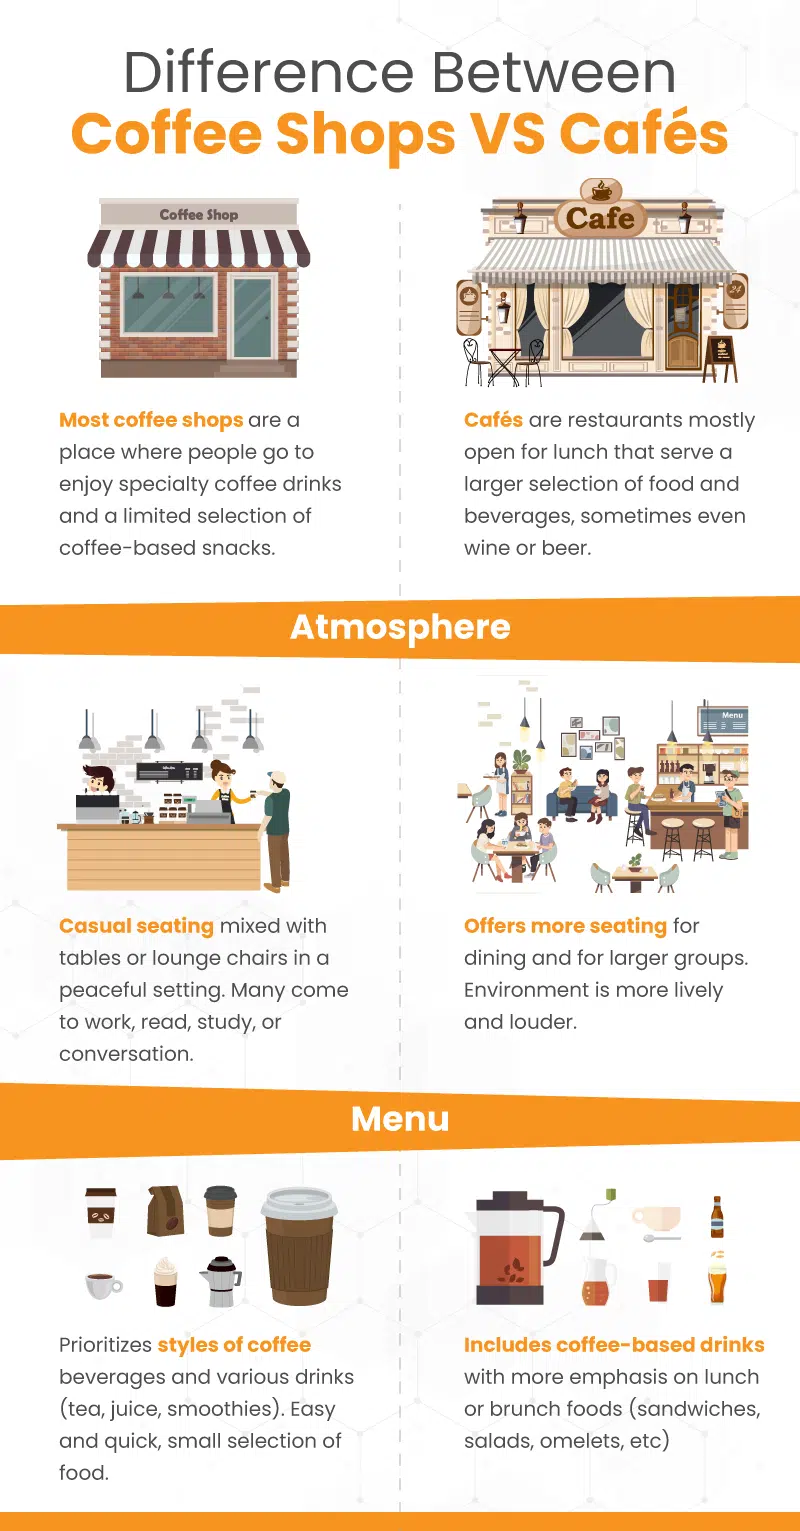 Inforgraph outlining the differences between coffee shops and cafes, including atmosphere and menu